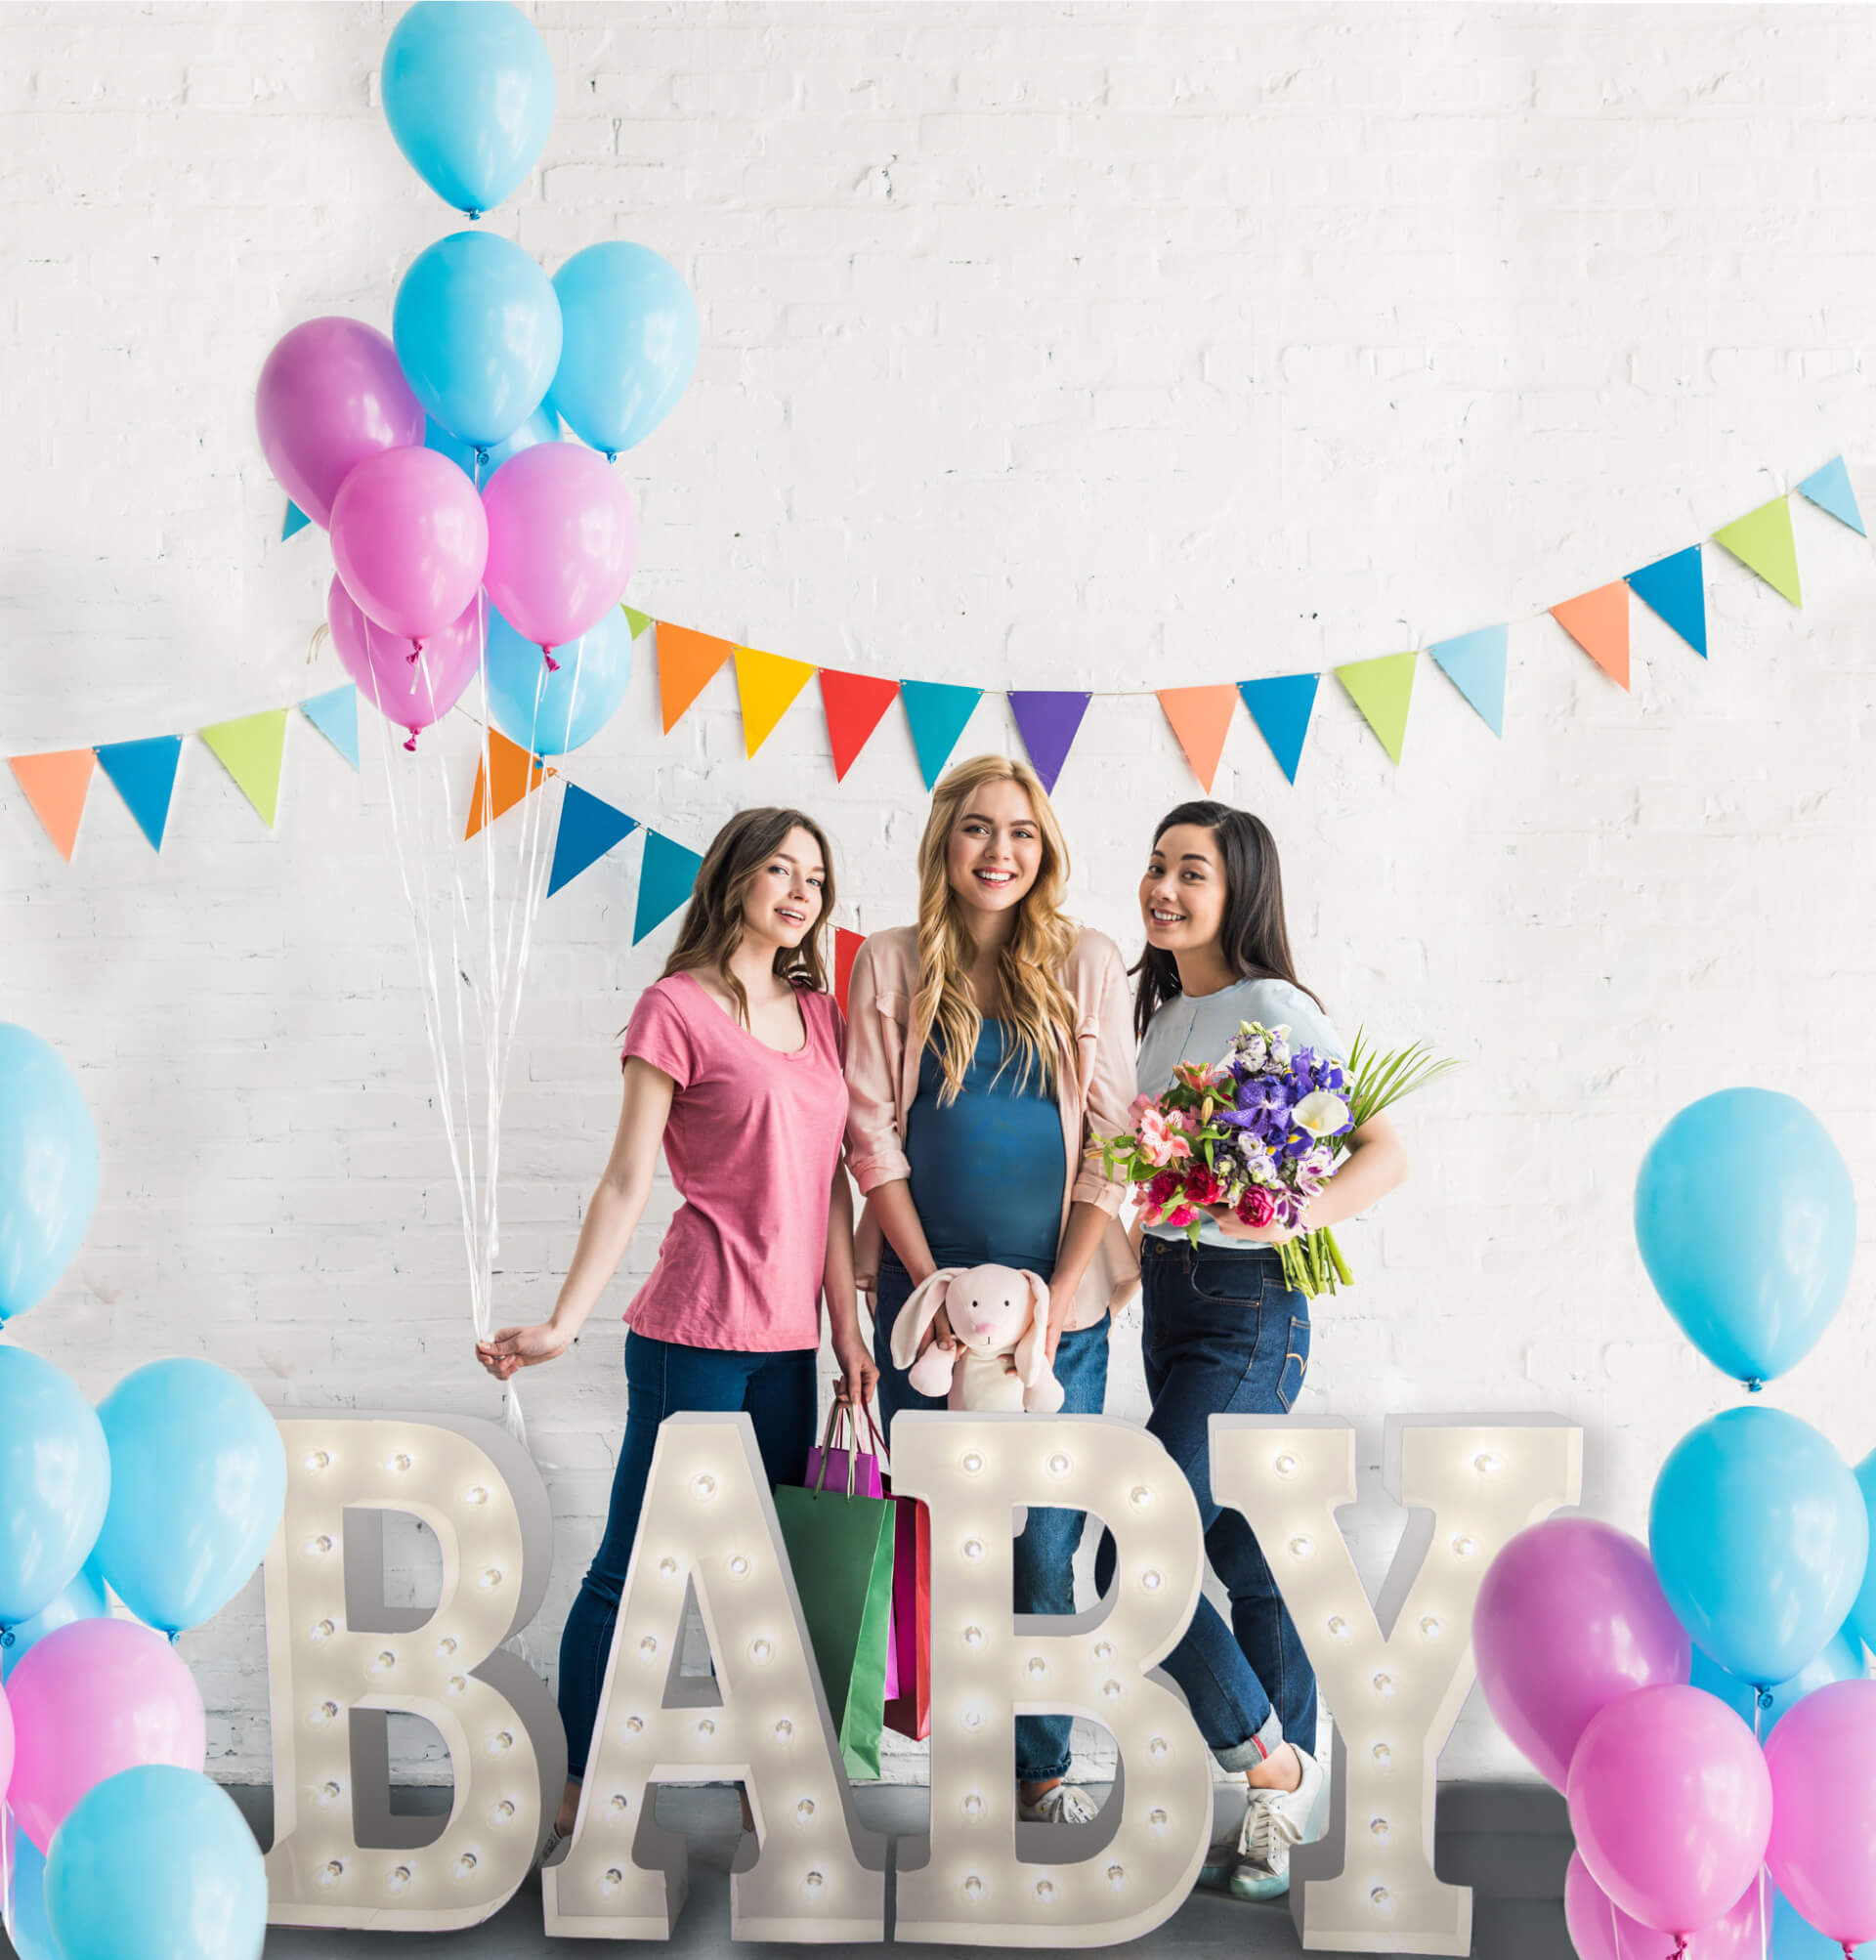 Three young women celebrating at a baby shower with the word "Baby" in marquee letters